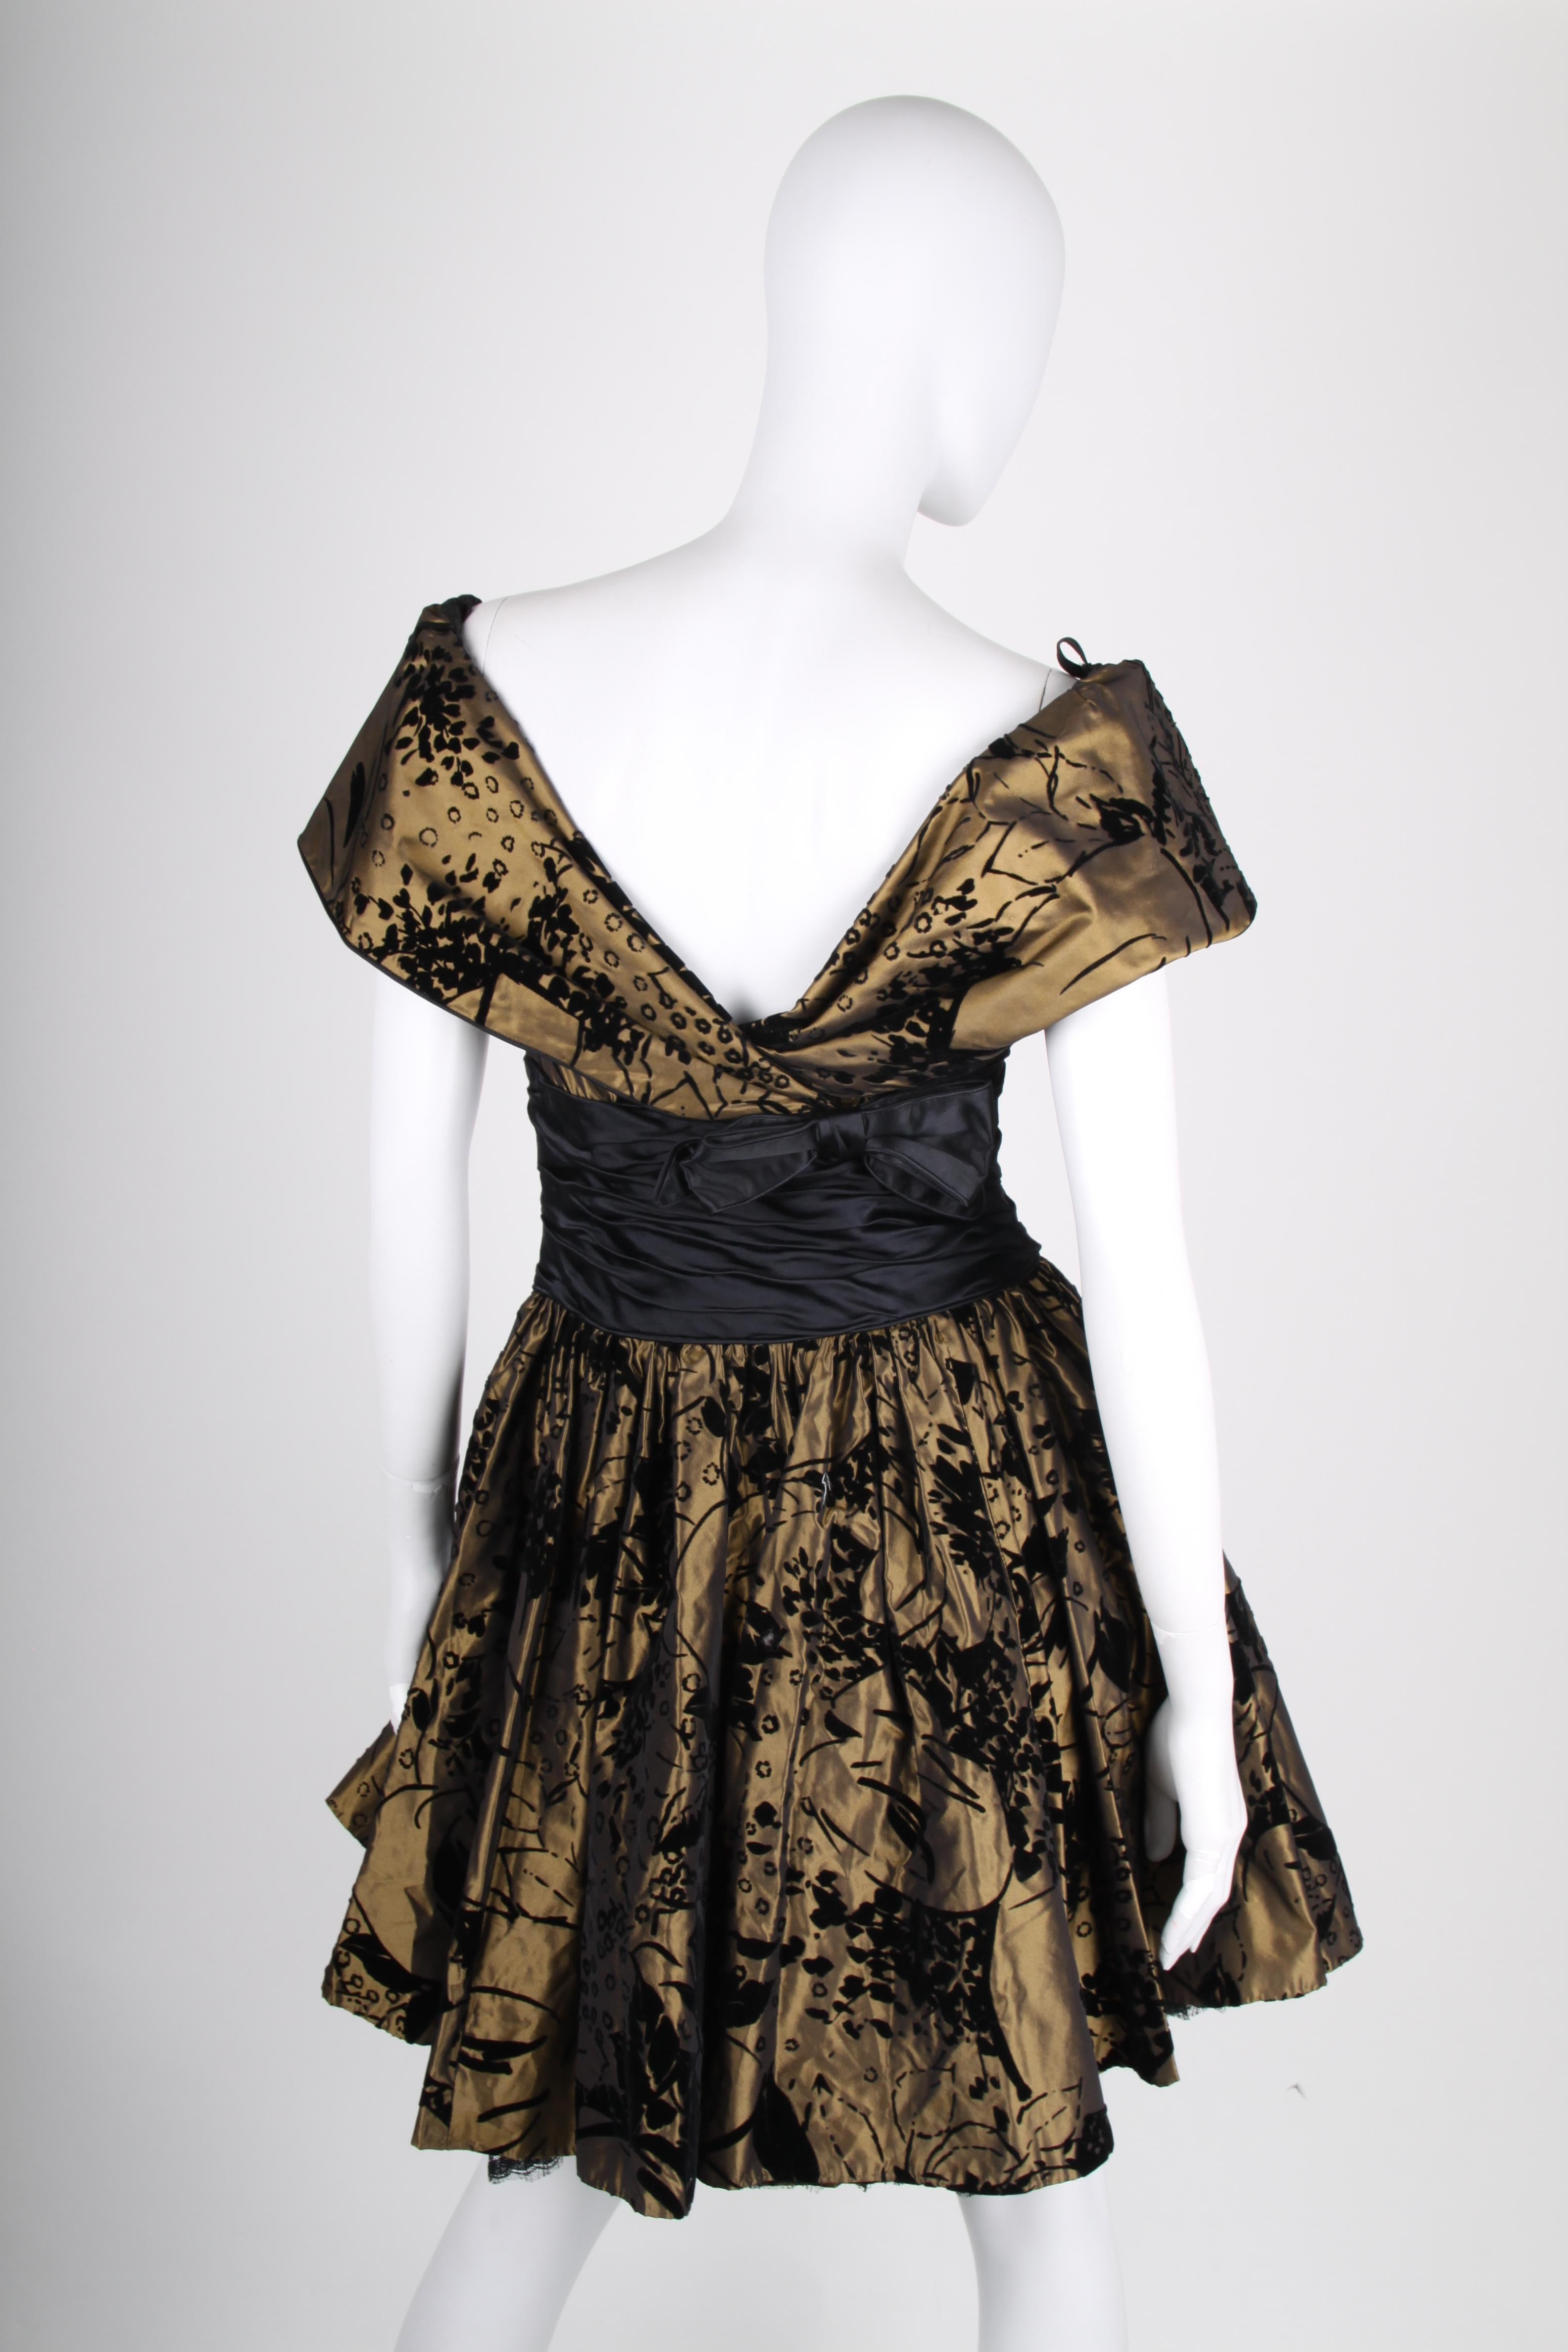 True vintage! Frank Govers made this beauty; a bronze coloured dress with a black velvet pattern.

An off-shoulder neckline, black satin in the waist and a bow on the back. Closure on the left side, upper side lined with black satin and the skirt